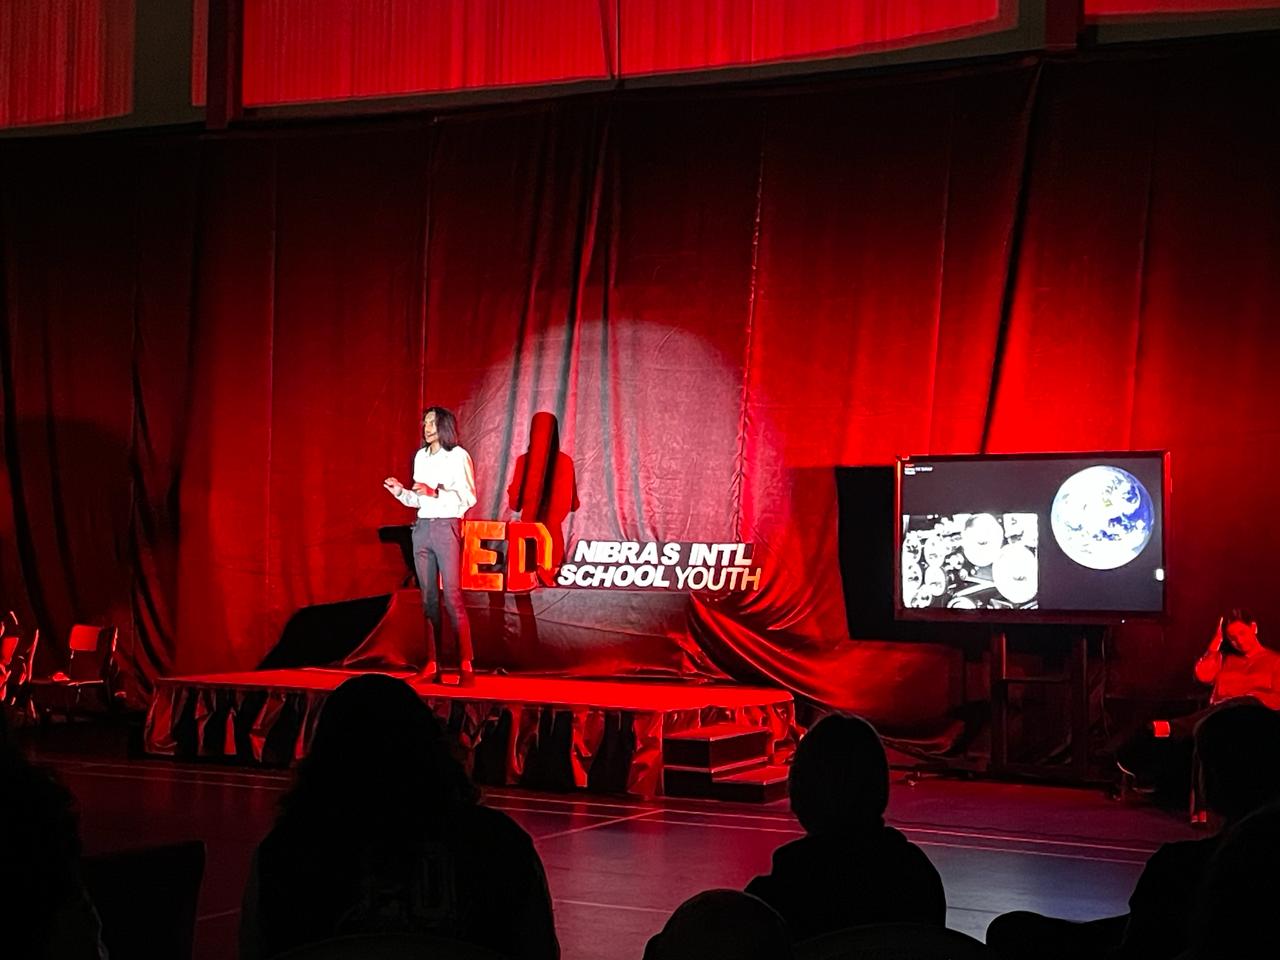 The TEDx NIS Experience: From a Student’s Eyes